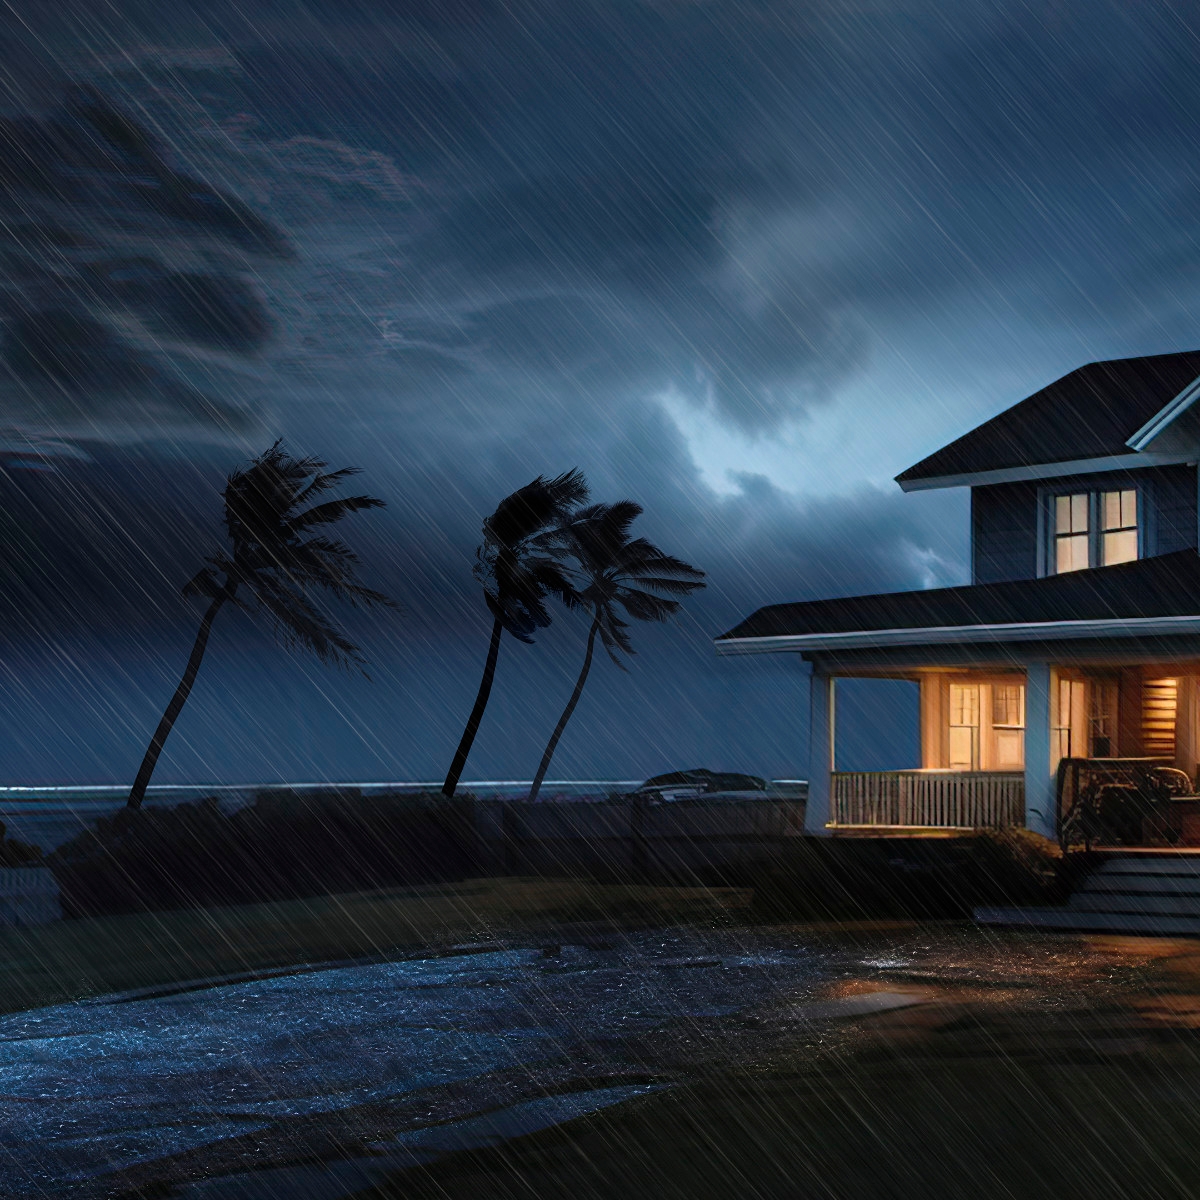 House home by the beach in storm weather / rain / wind / hurricane - Article [13]: How to Create a Hurricane Evacuation Plan
DAM # aaf24859
[Card Article [13] 1:1]